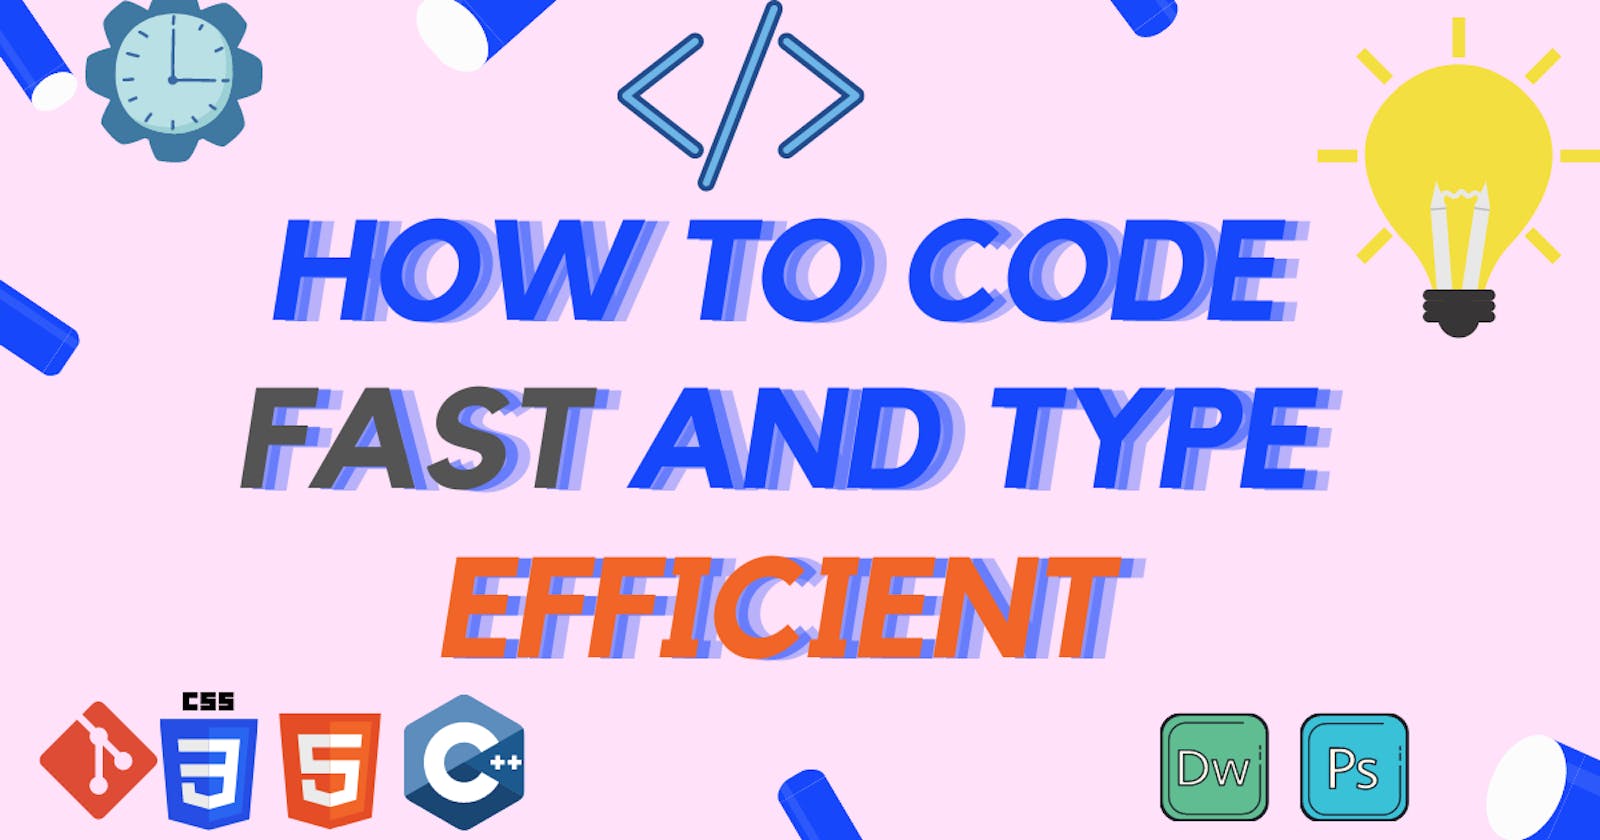 How to code fast and type efficiently 😎